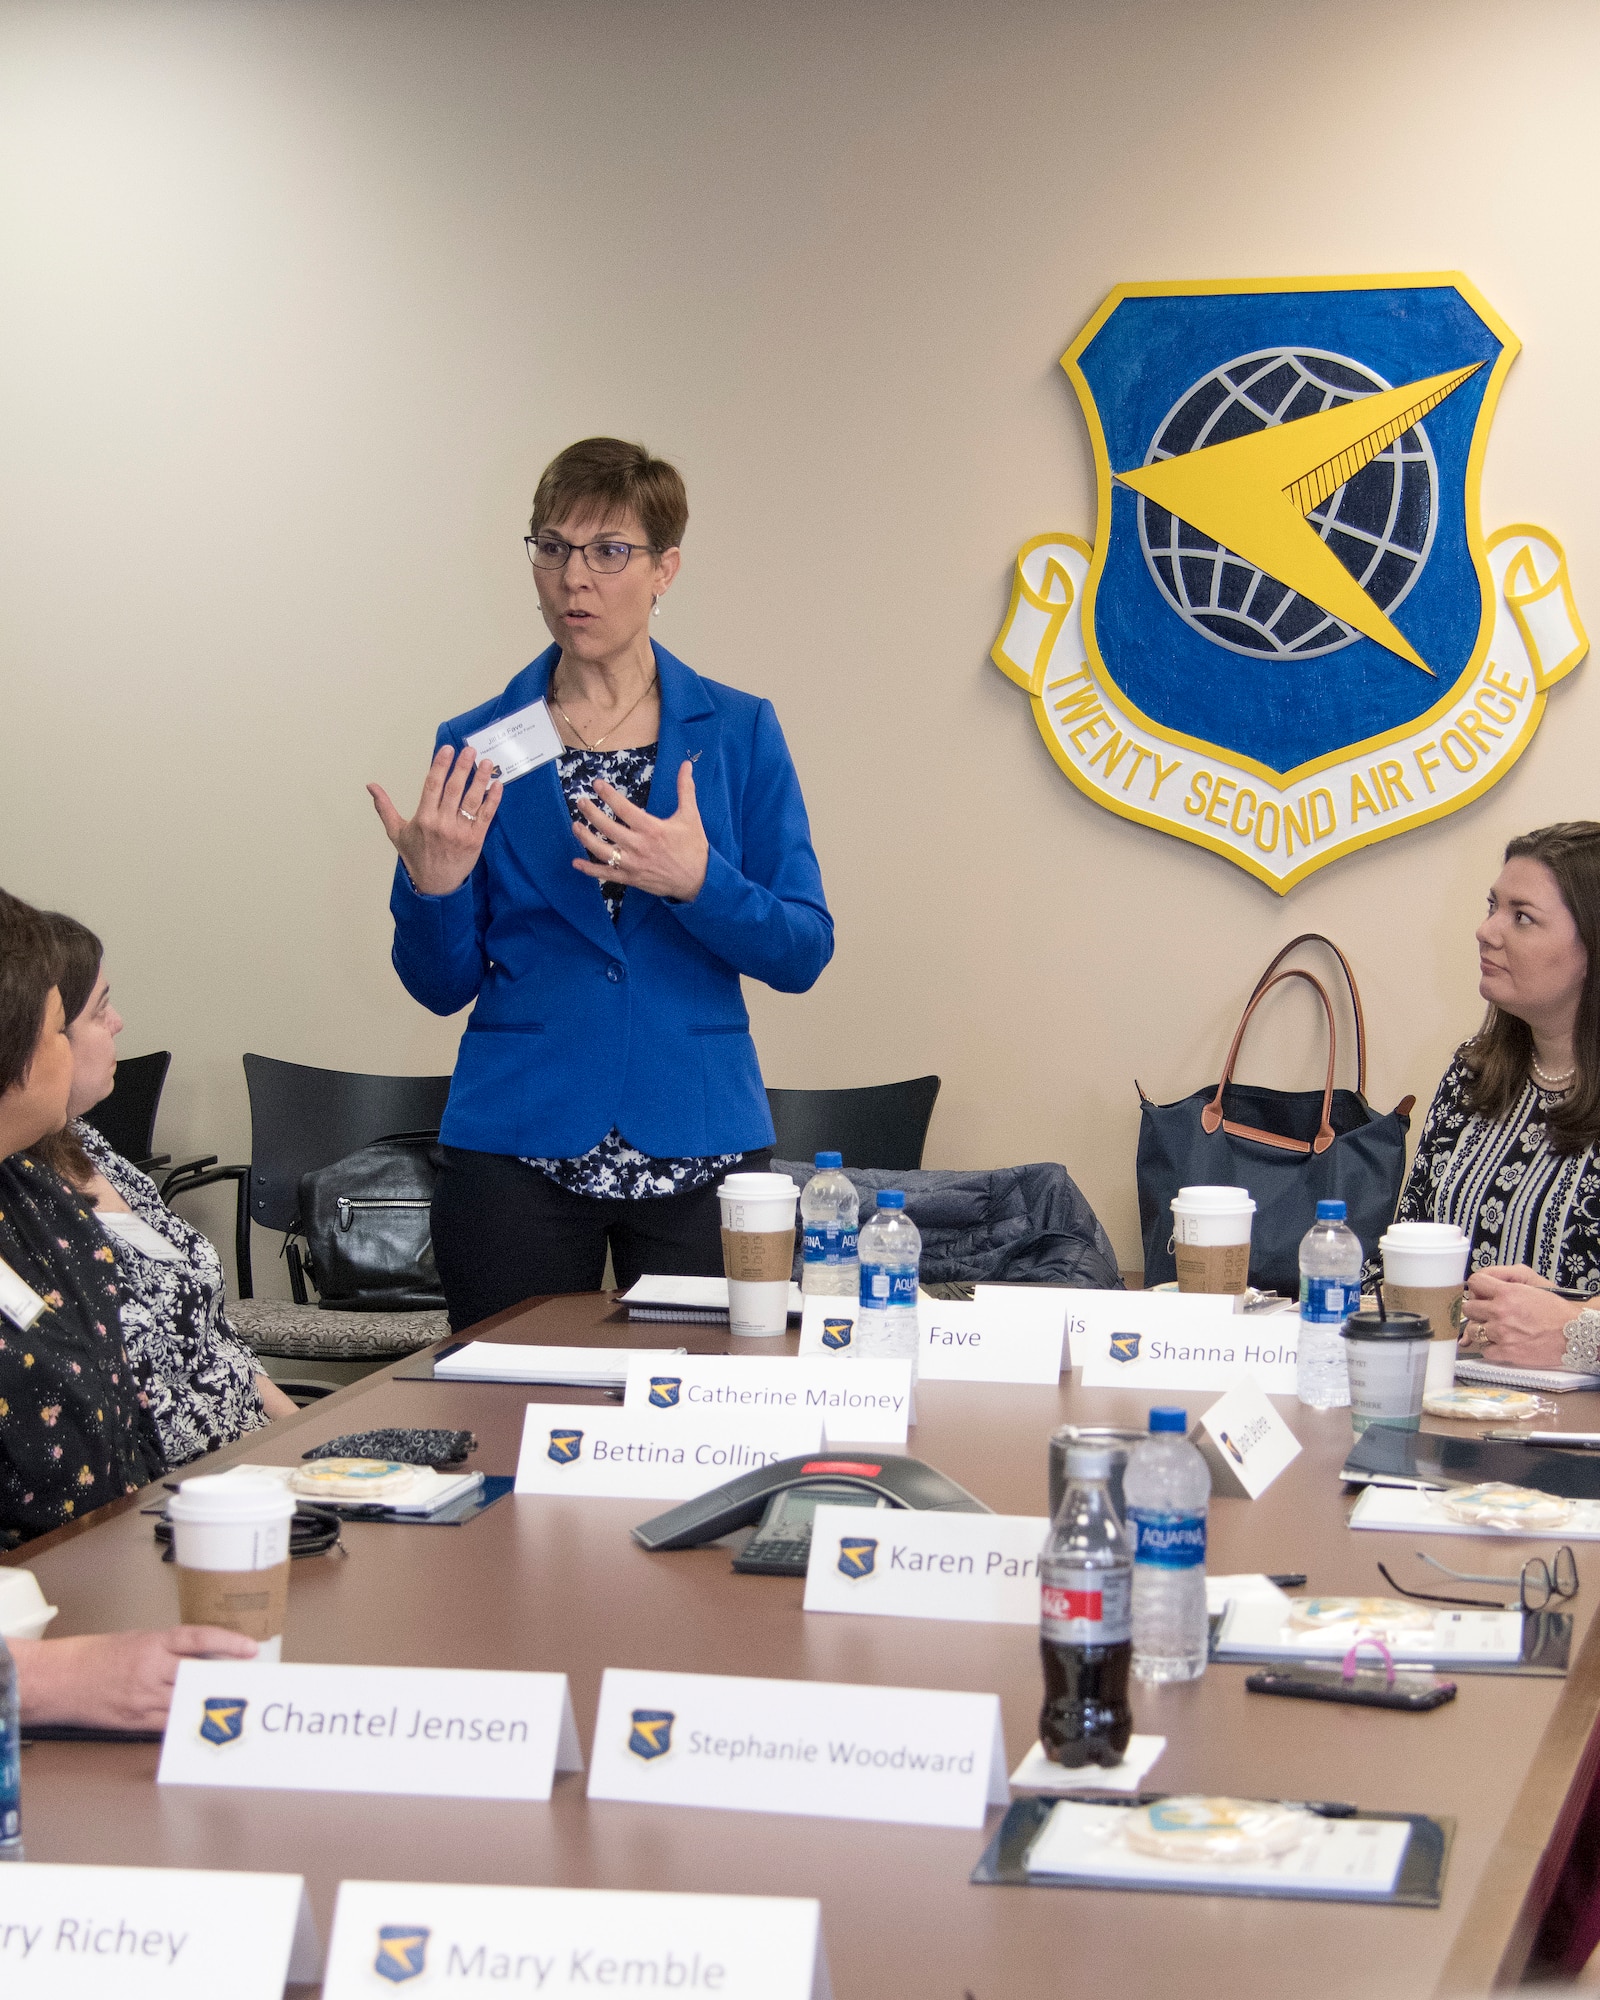 Jill La Fave, 22nd Air Force senior spouse, talks to fellow key spouses from across 22nd Air Force at Dobbins Air Reserve Base, Georgia, April 3, 2019.